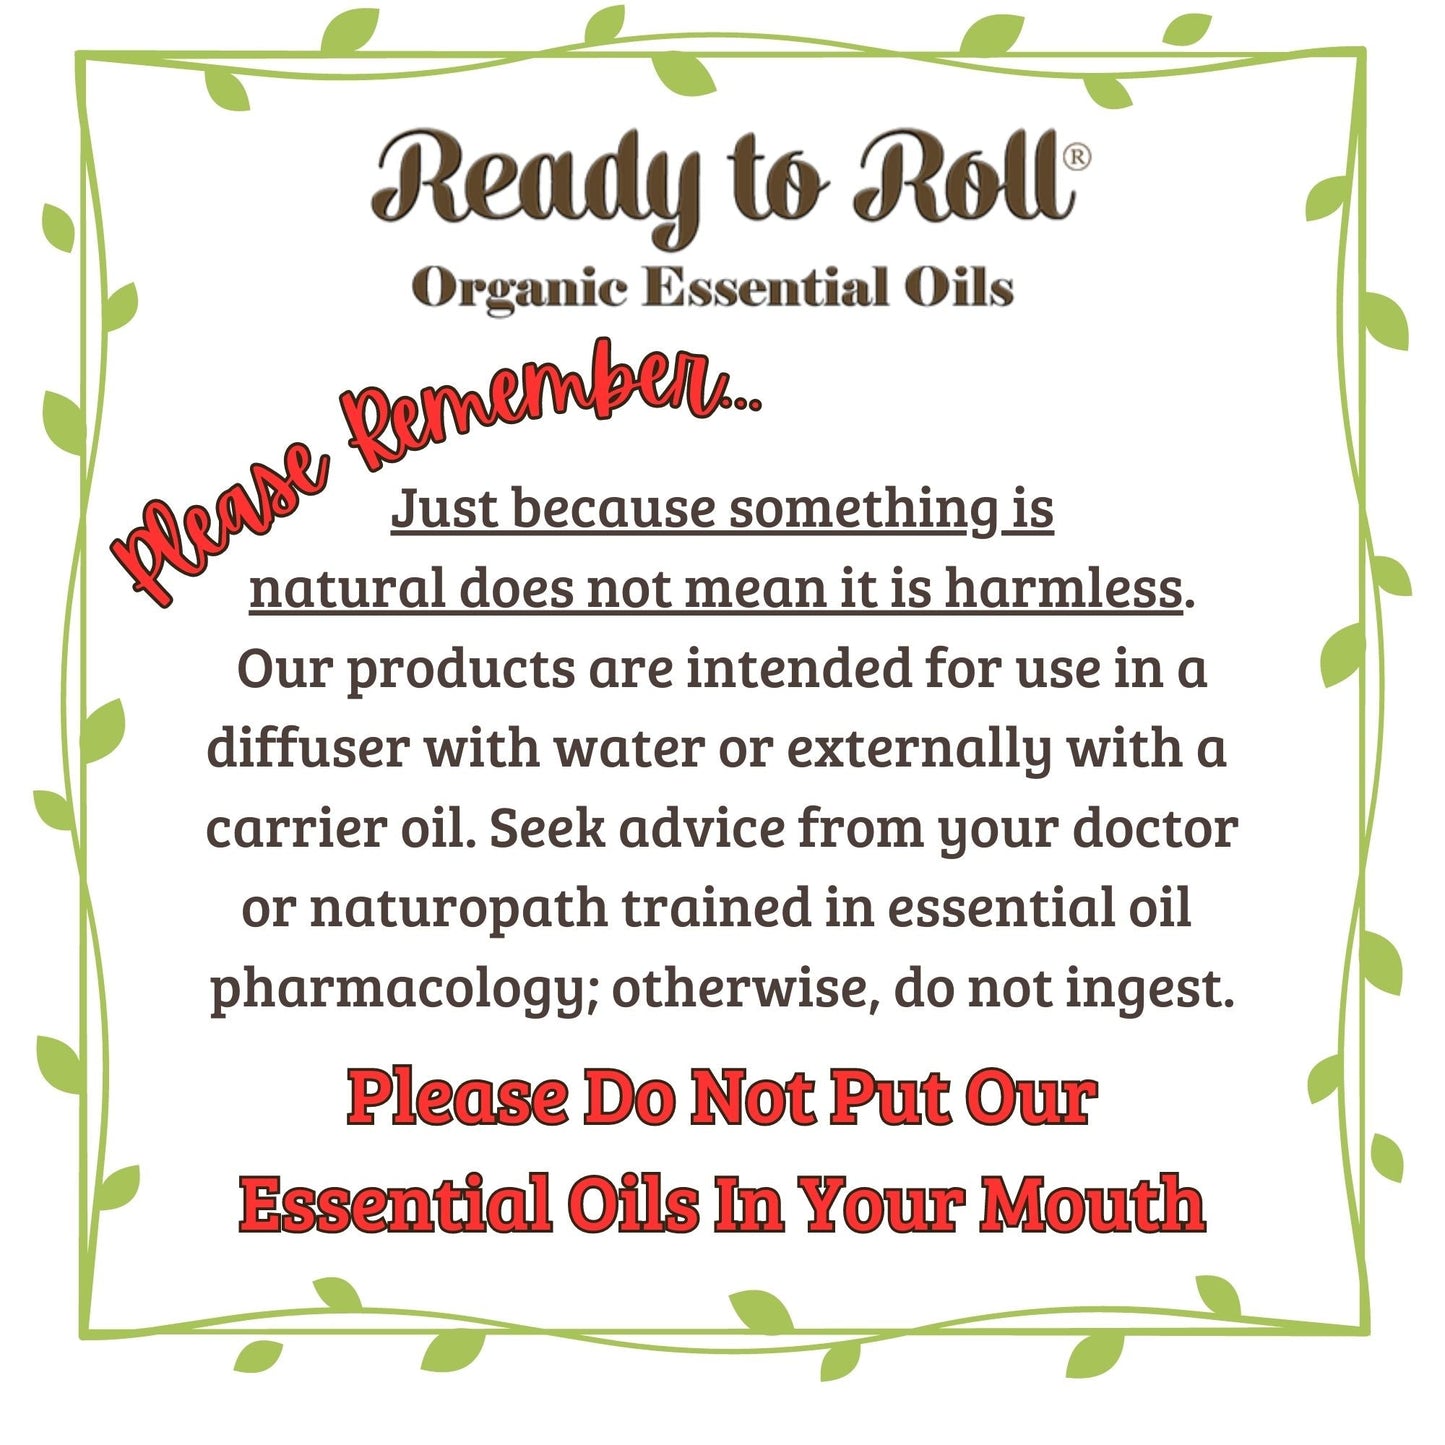 Organic Essential Oils in the Giftable Wellness Warrior Sampler Set by Ready to Roll®